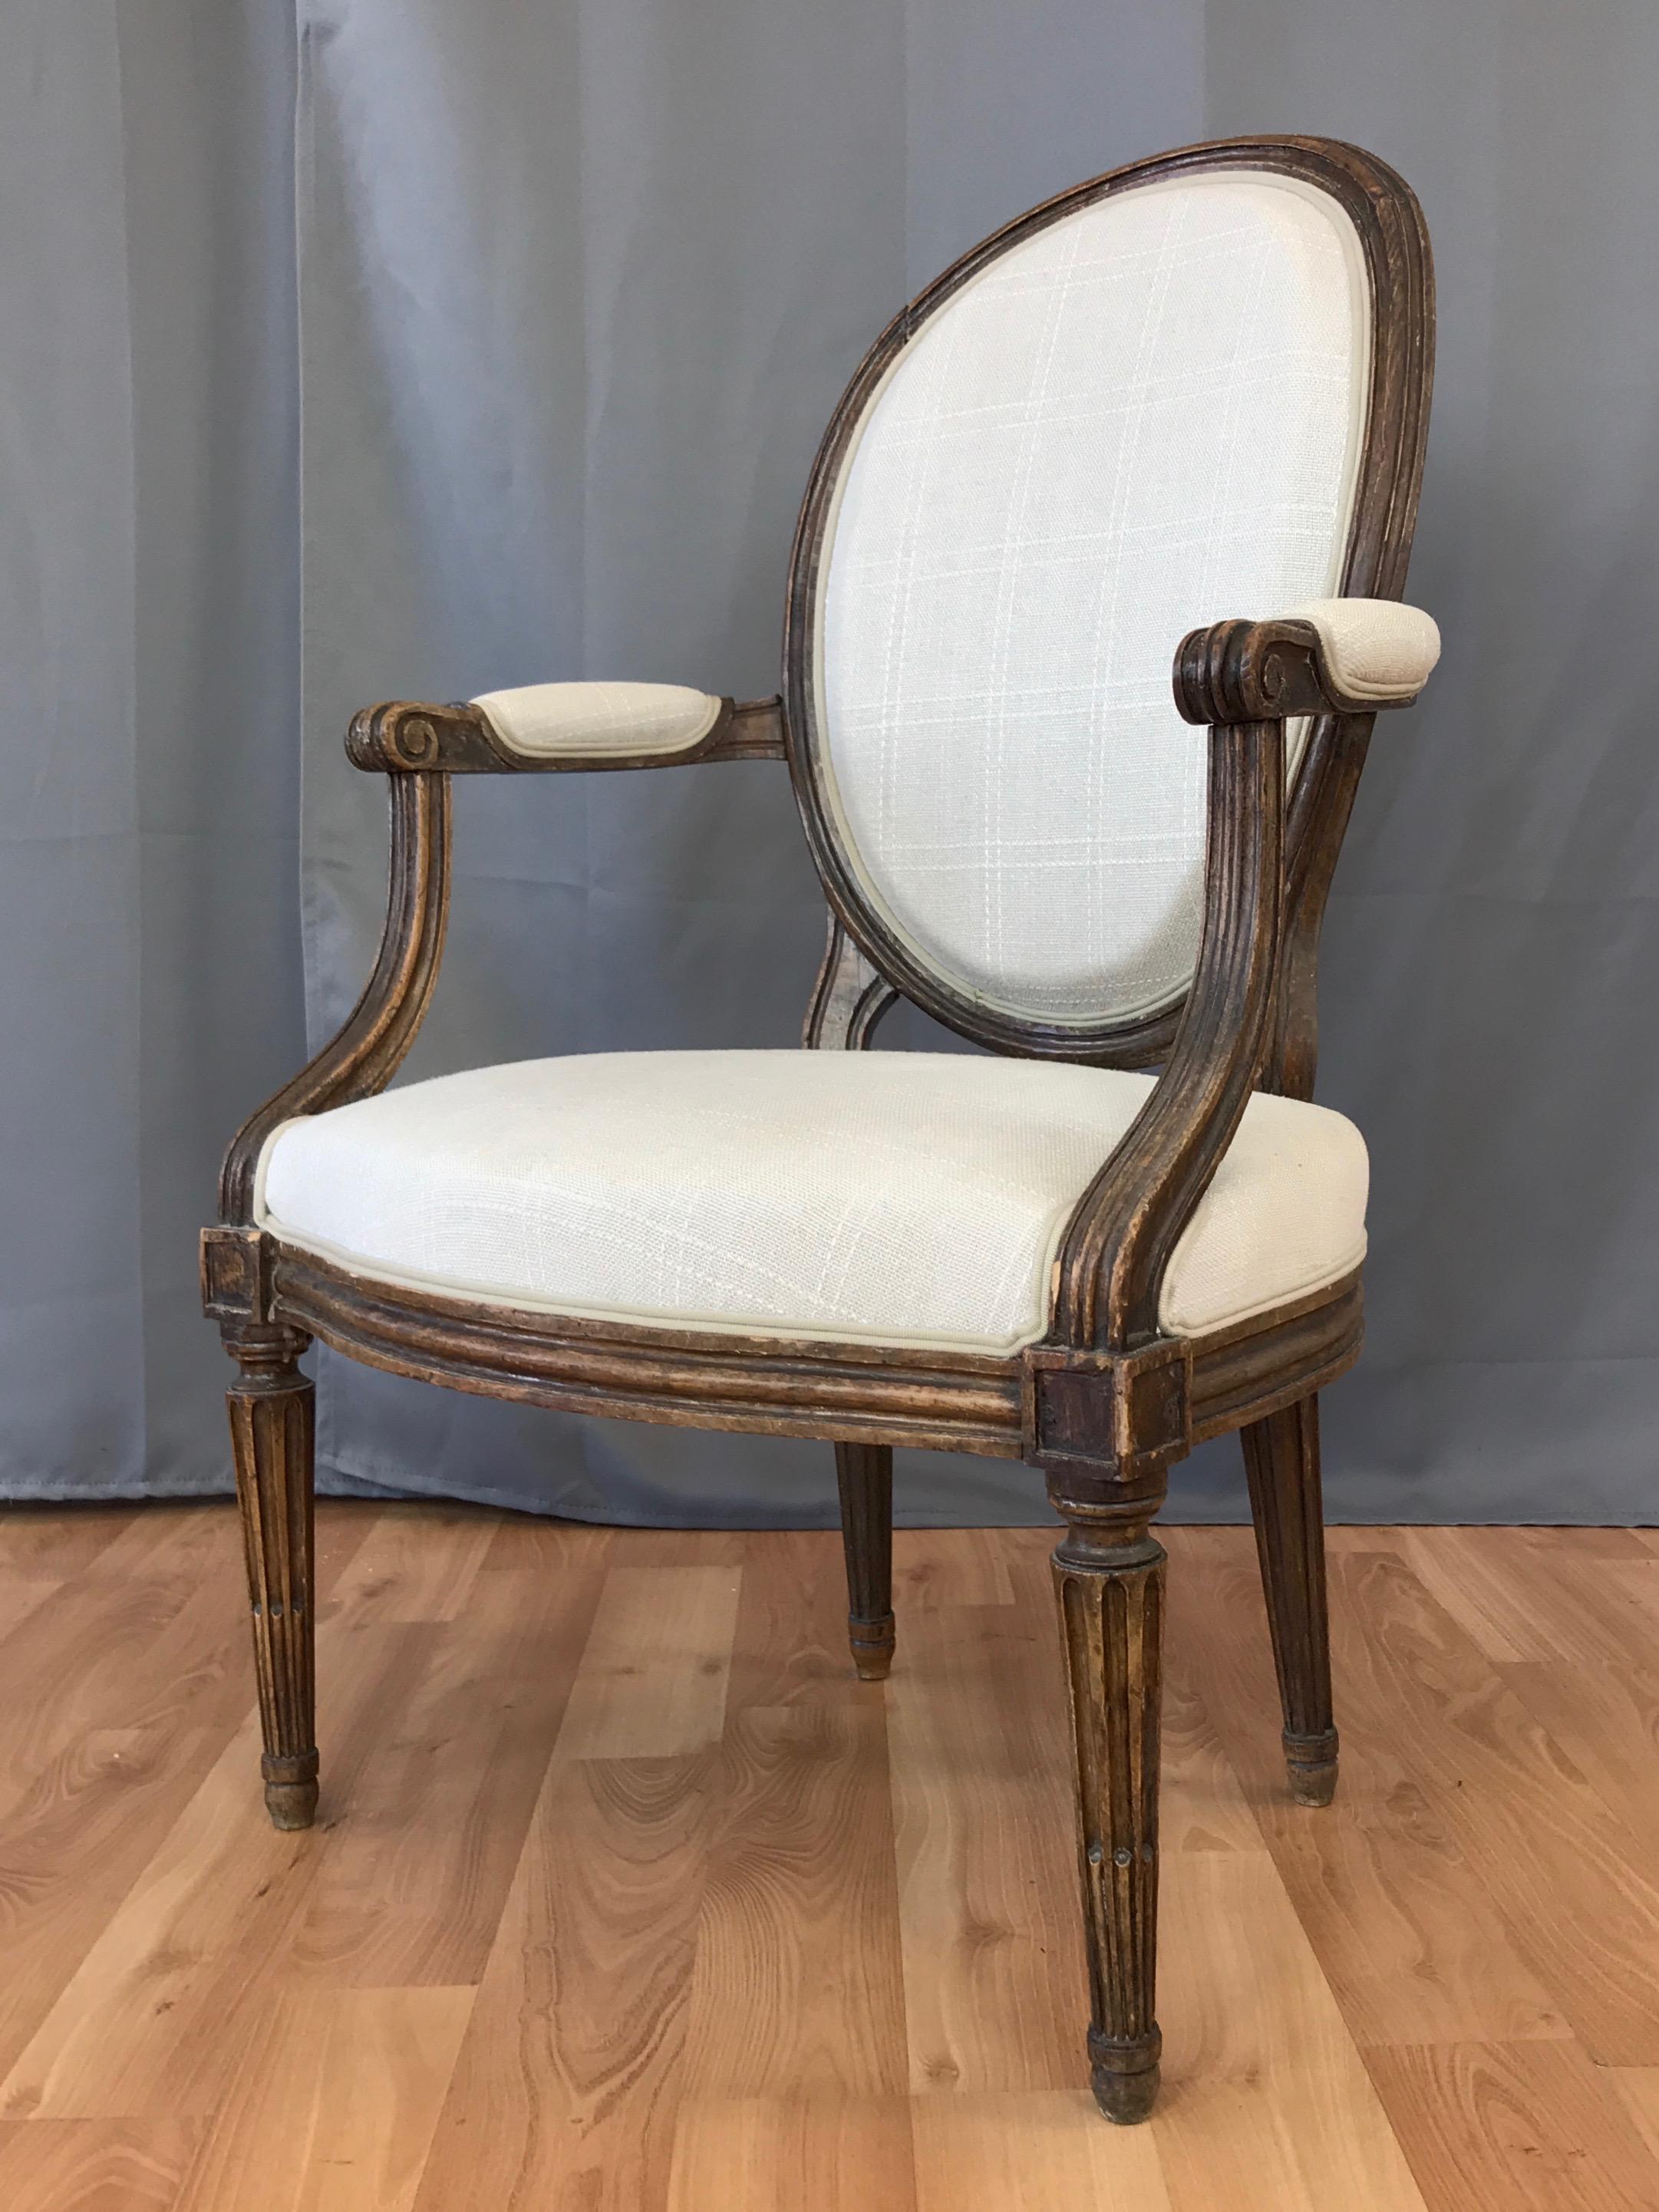 A Louis XVI fauteuil-style armchair in beech and linen by notable French master furniture maker Martin Jullien, circa 1760s.

Balloon back rises above shaped seat flanked by cabriolet scroll arms. Stands on fluted and turned legs, the back pair